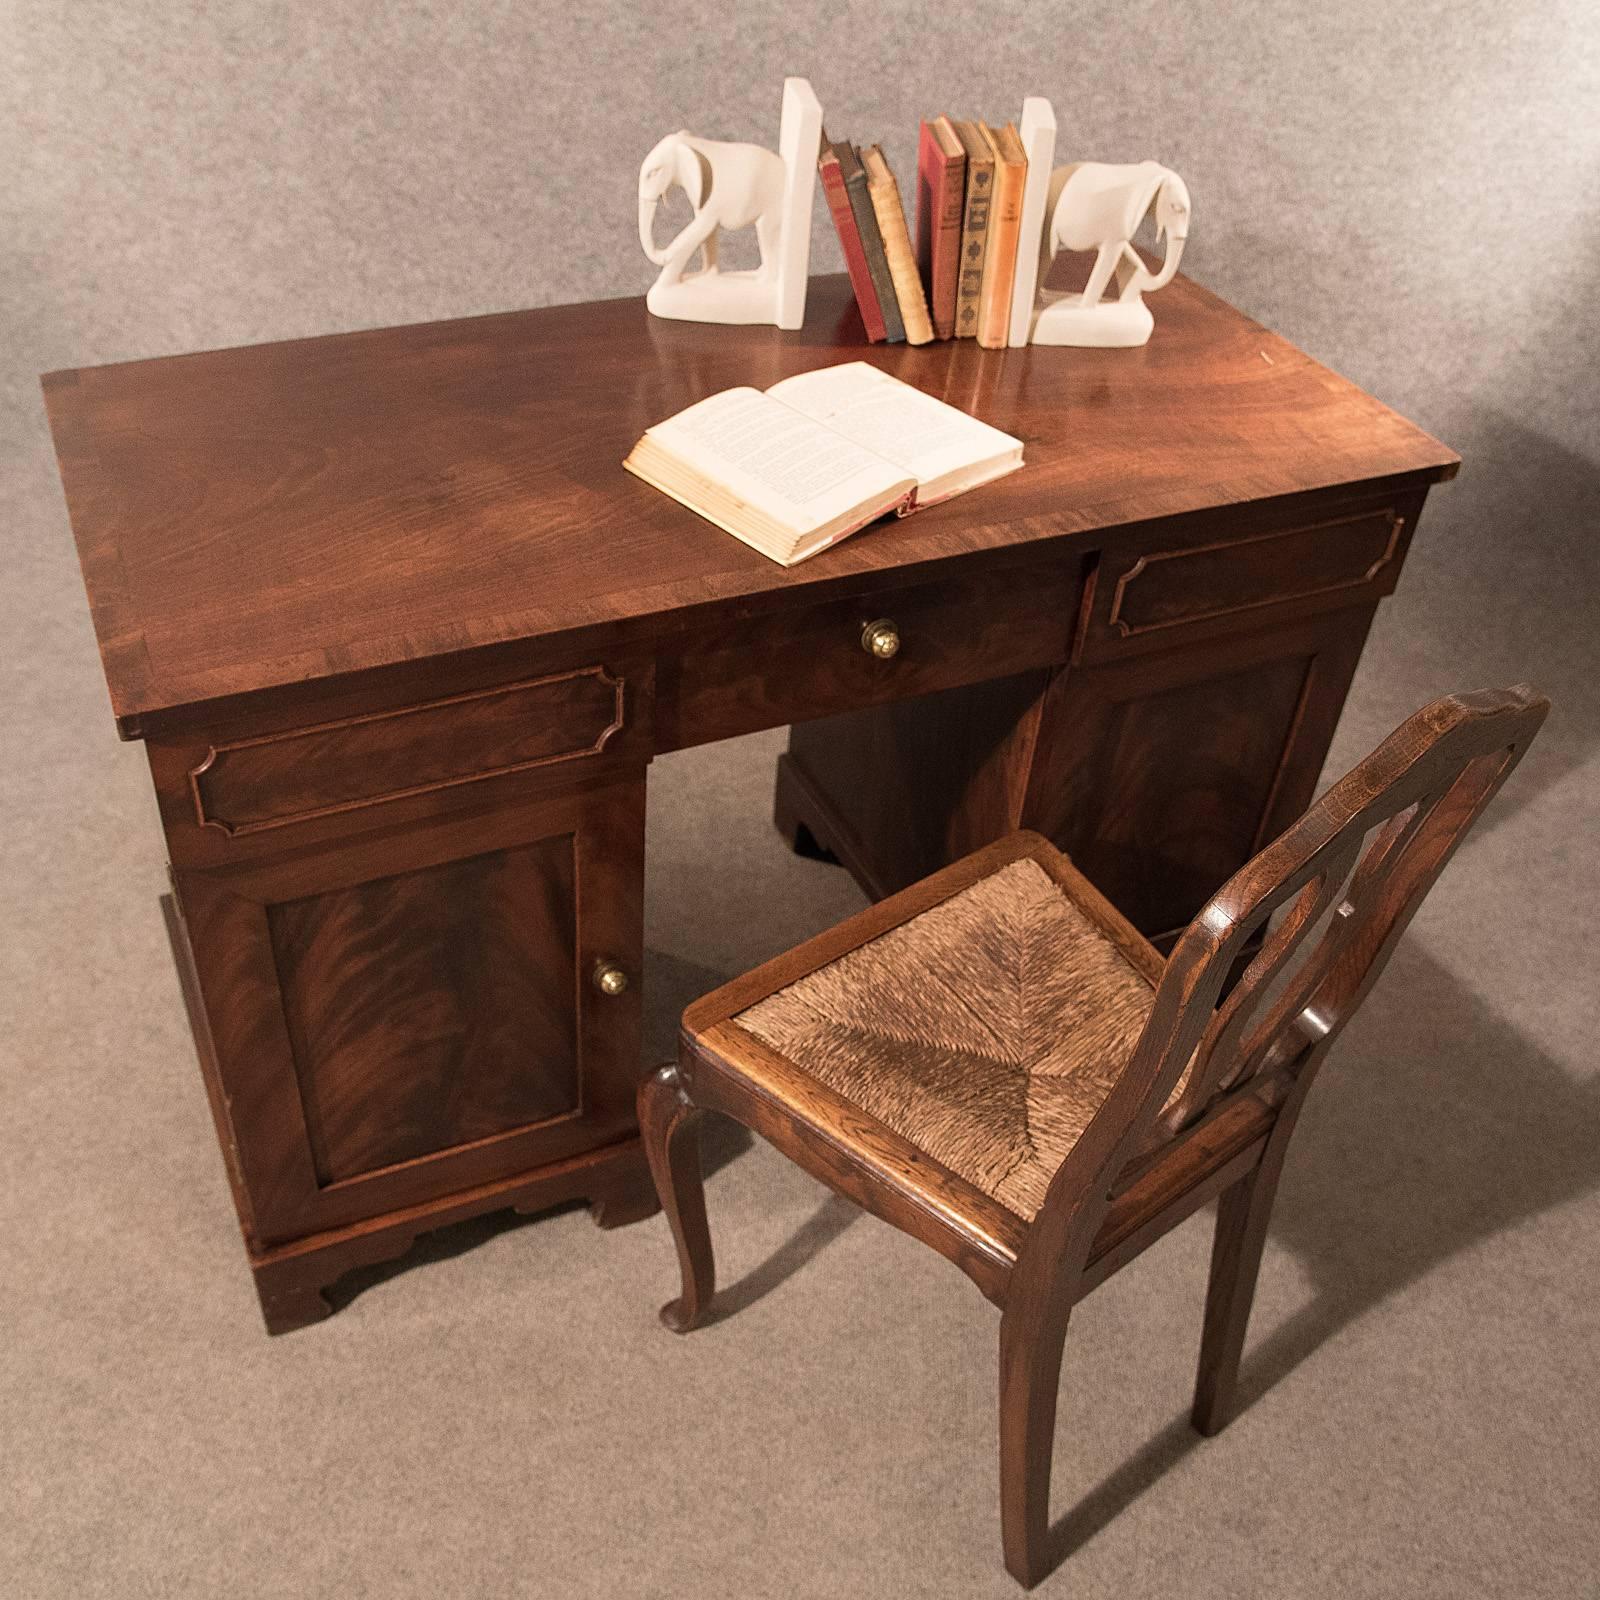 Great Britain (UK) Antique Pedestal Desk Study Table Quality Flame Mahogany Victorian English